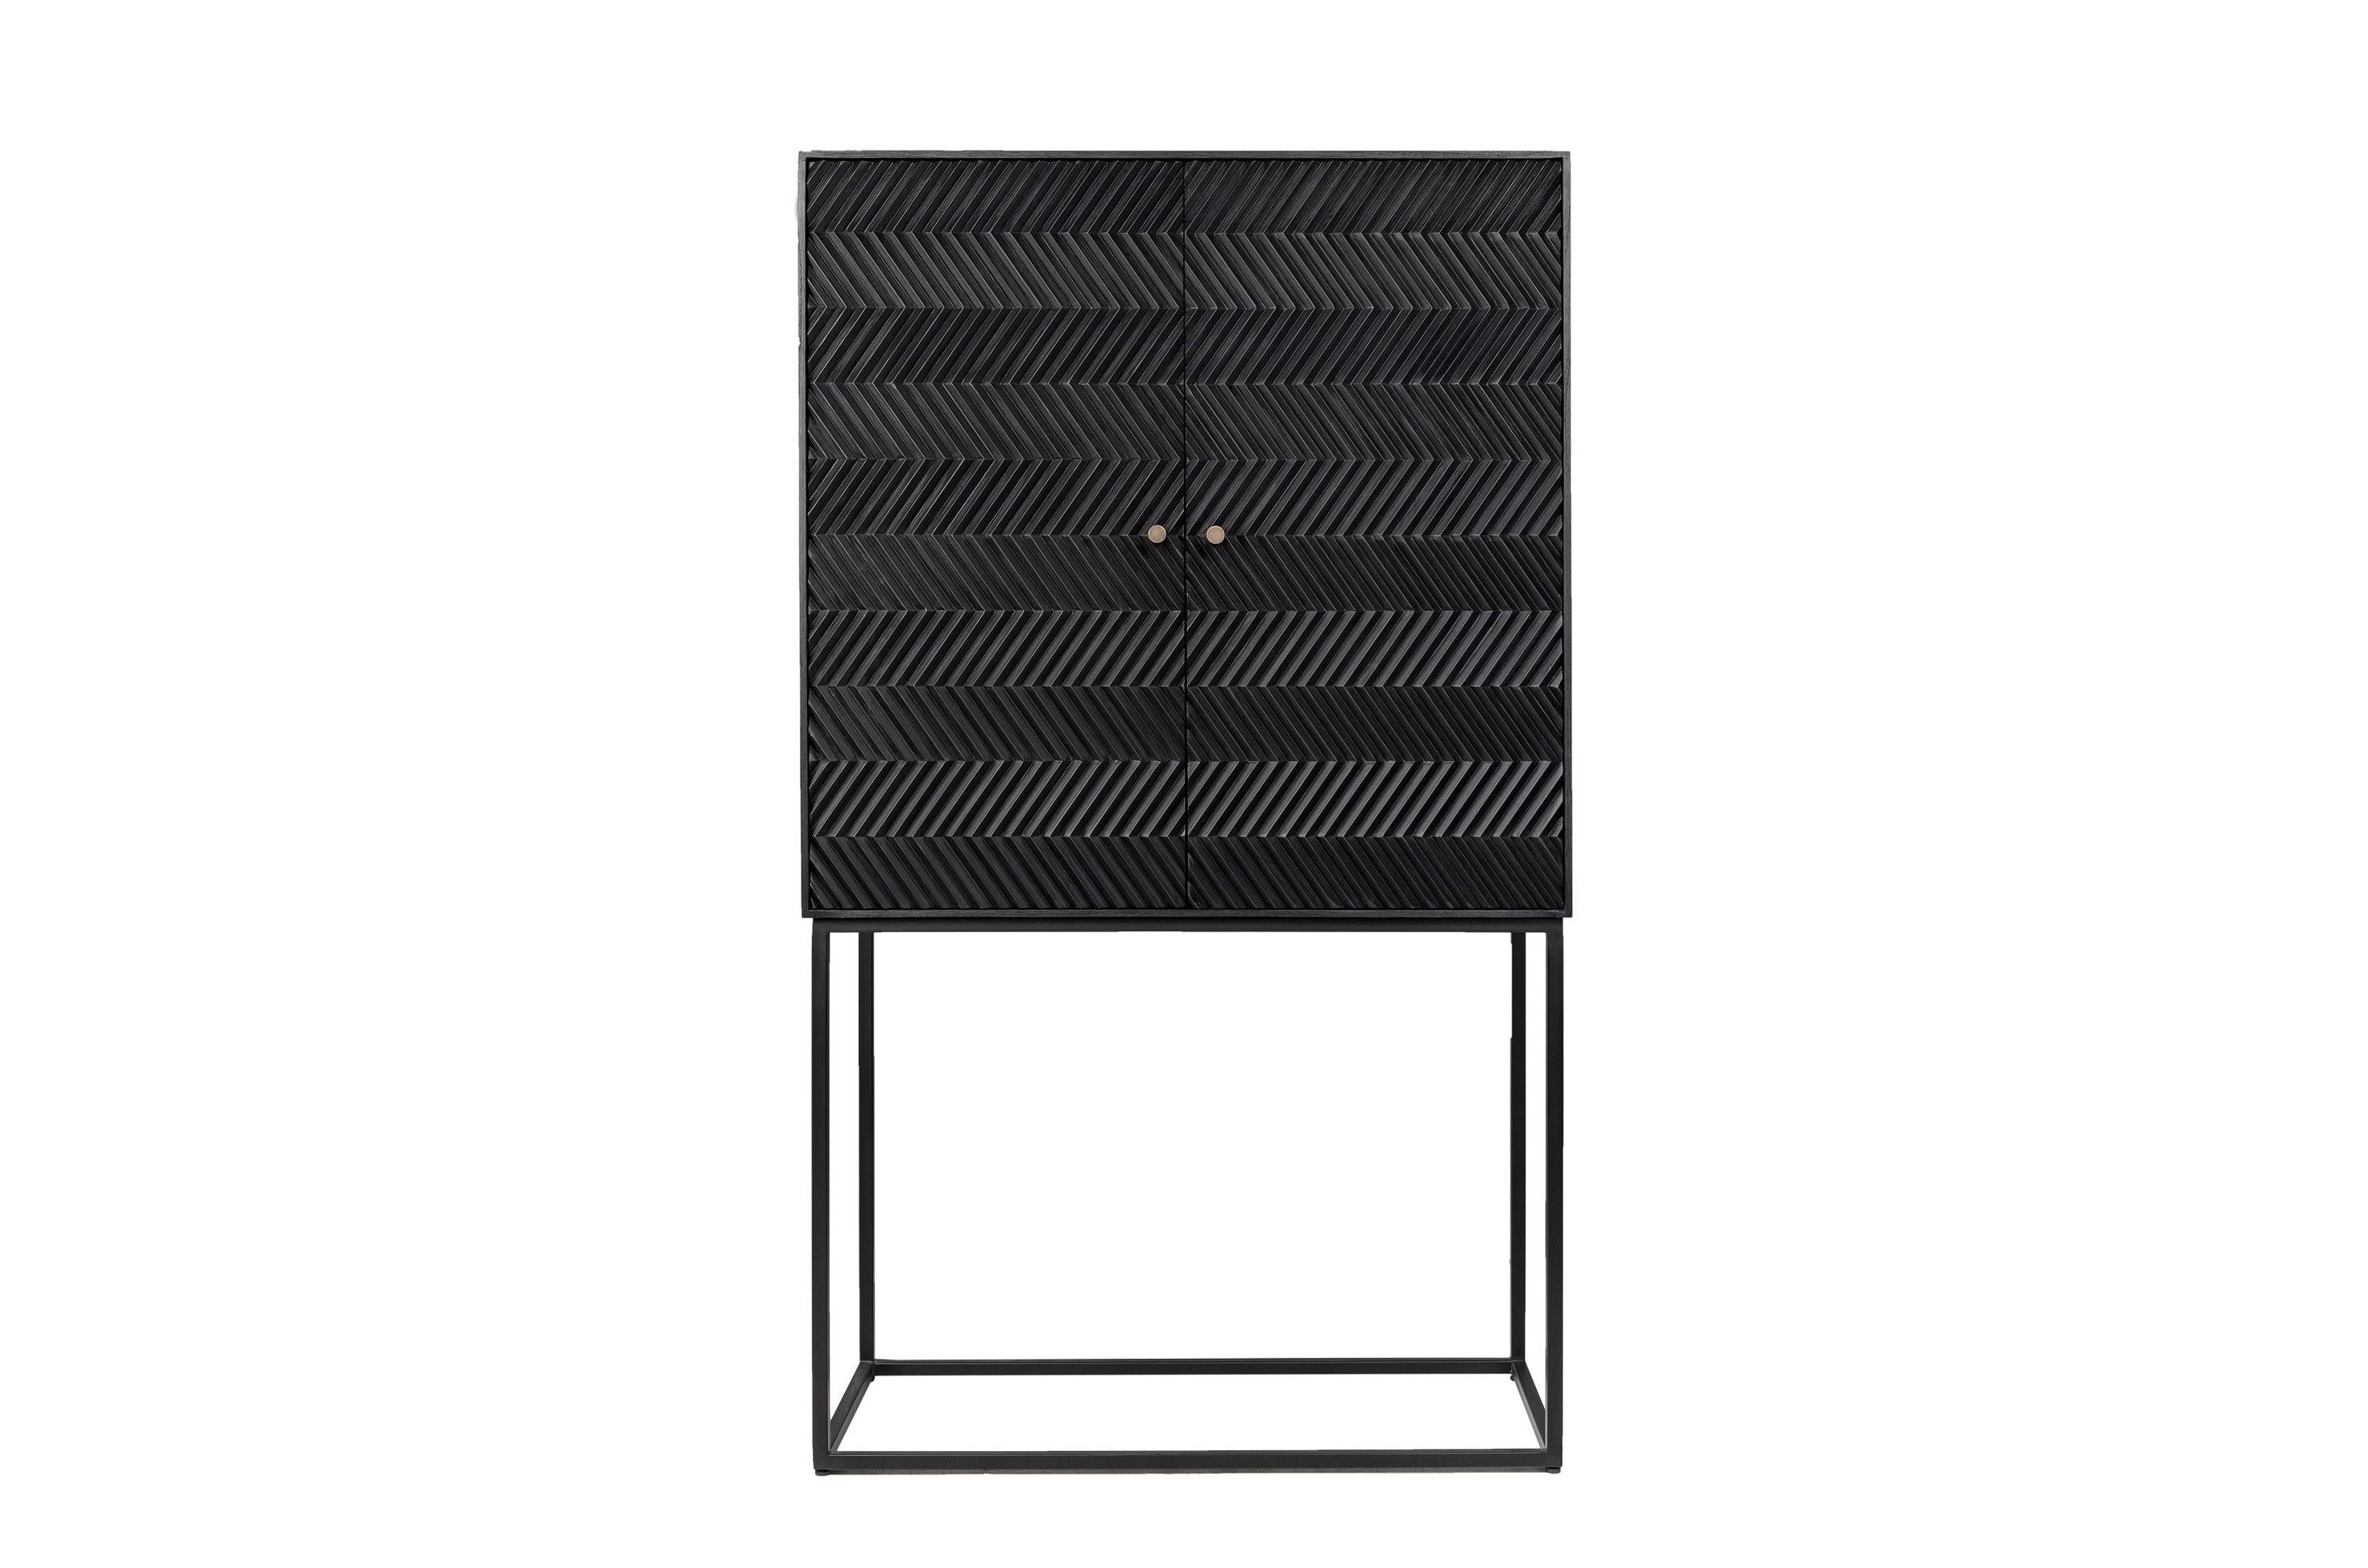 Brutalist style and 1950s Dutch design cabinet: An eyecatcher with geometrical and harmonious lines, composed of 2 graphic panels doors opening on shelves and airy black metal feet.